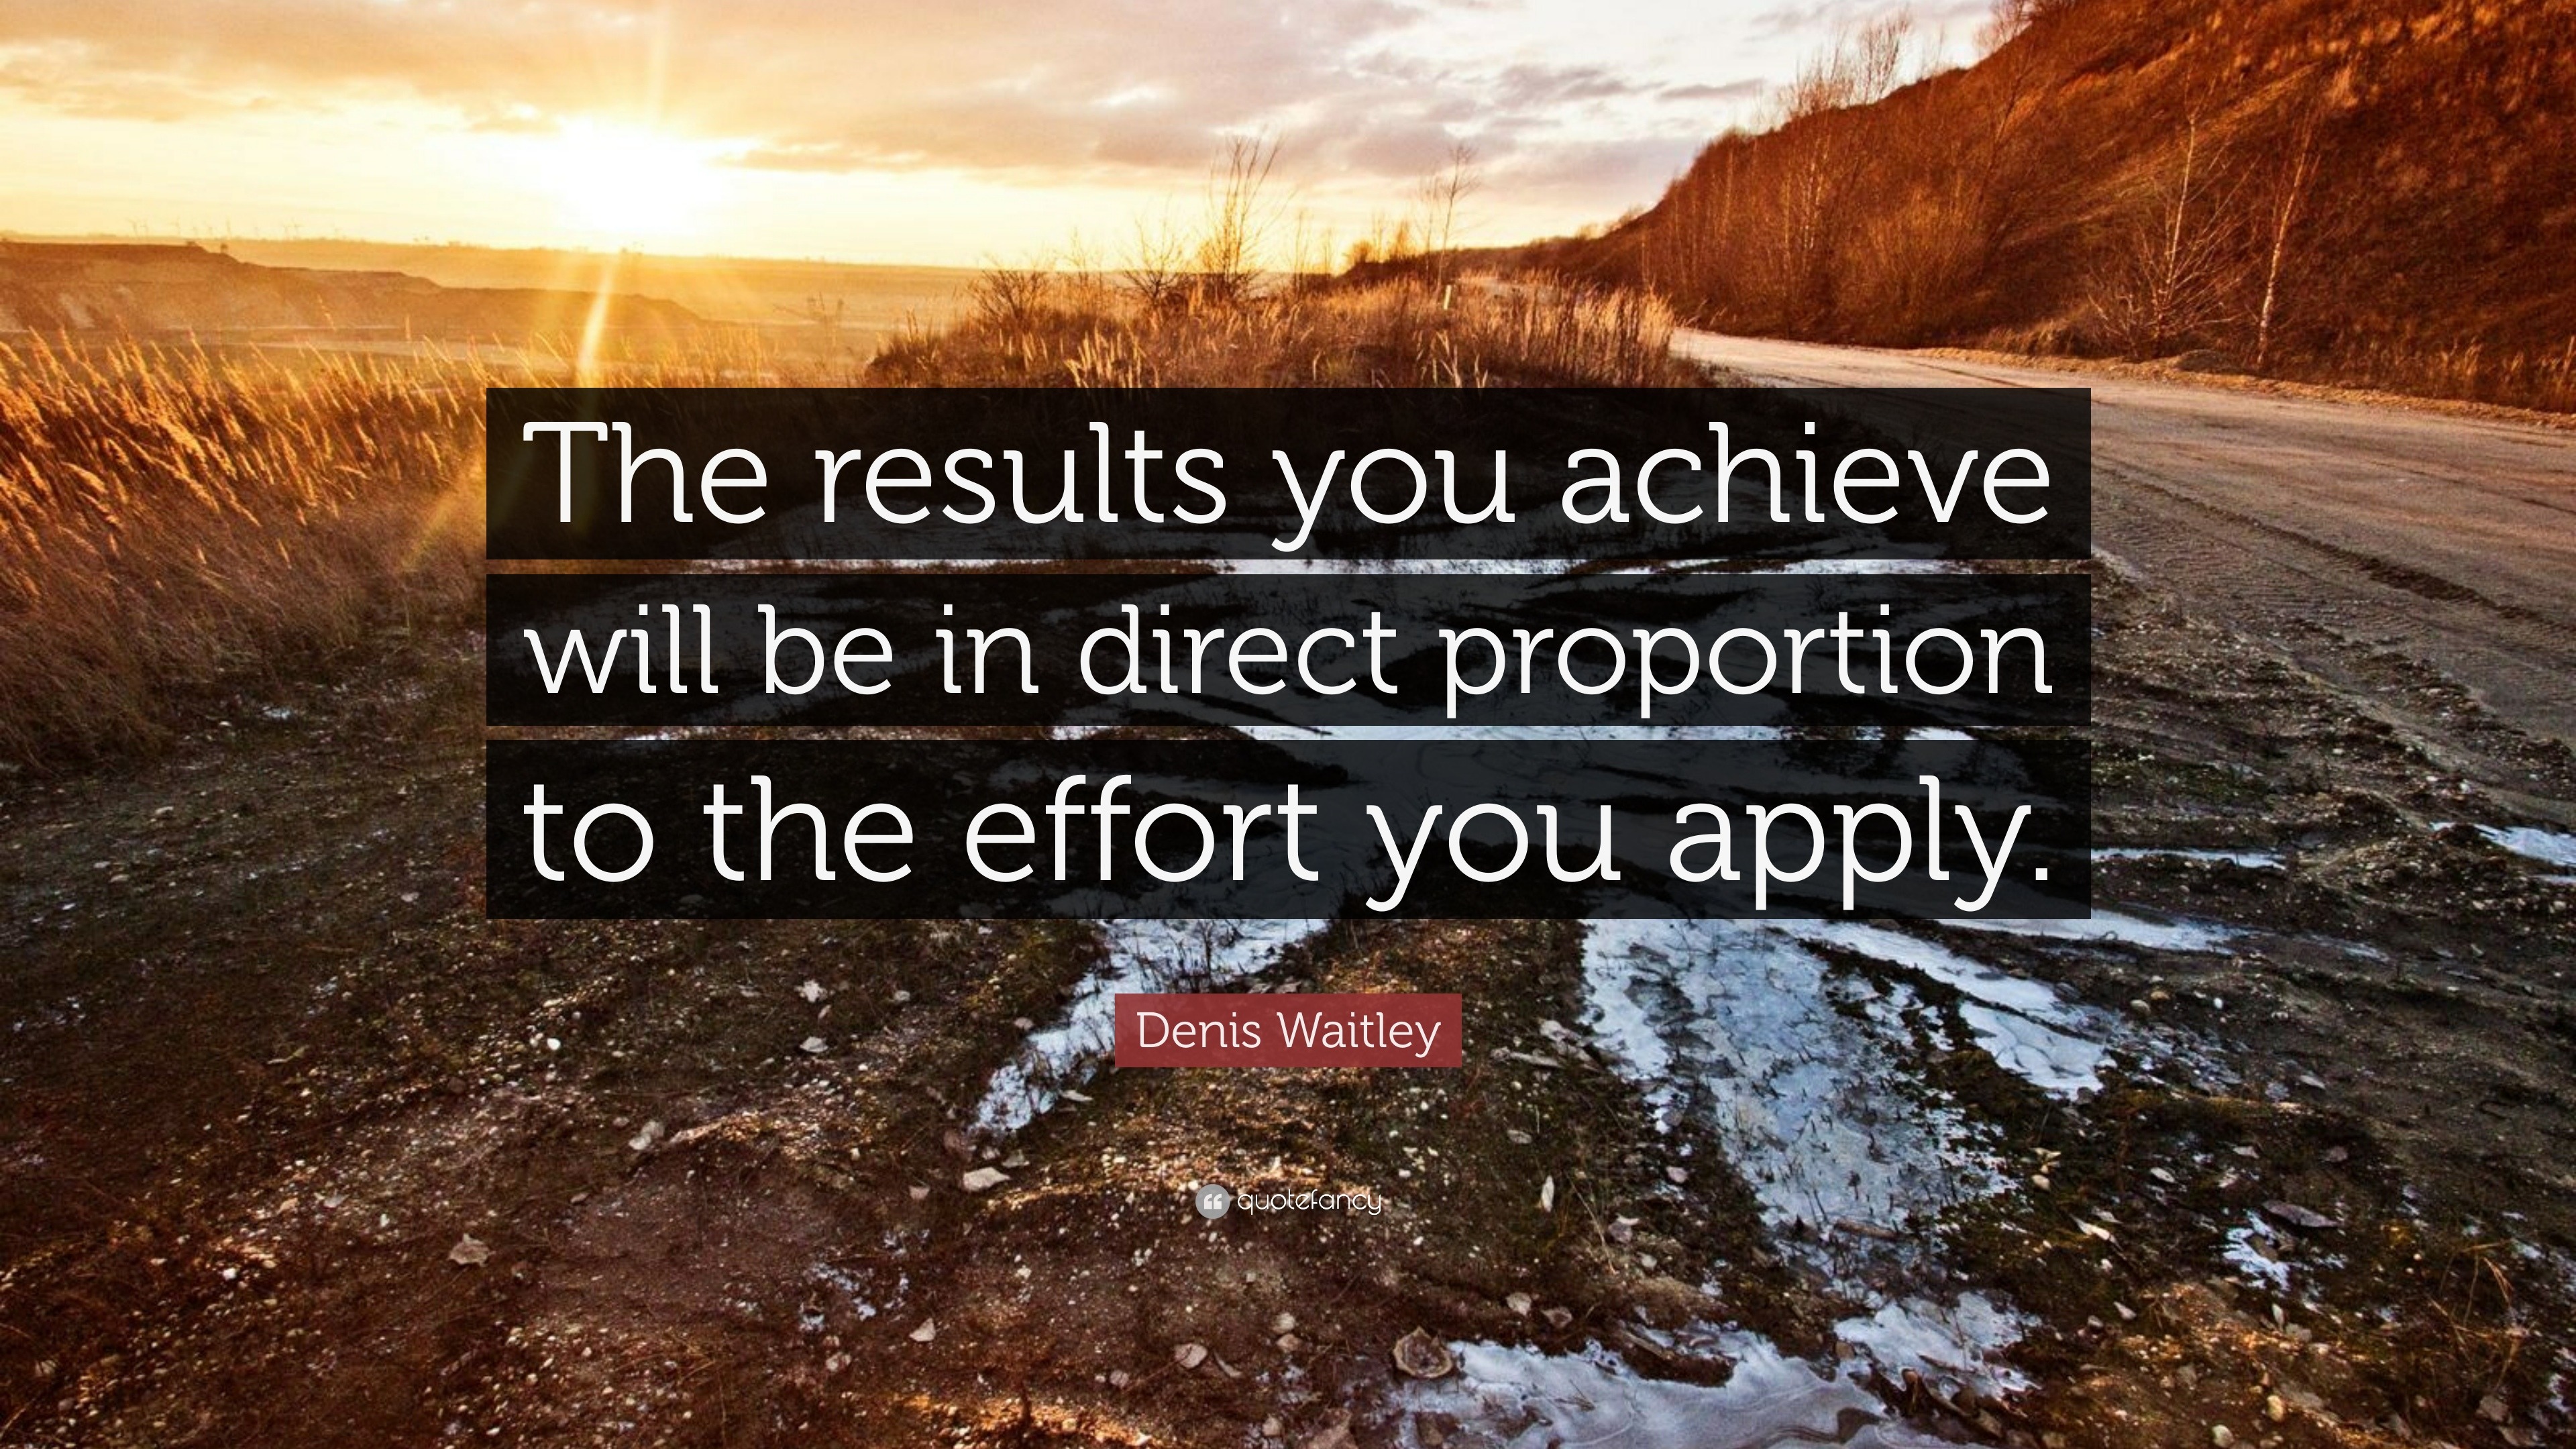 Denis Waitley Quote: “The results you achieve will be in direct